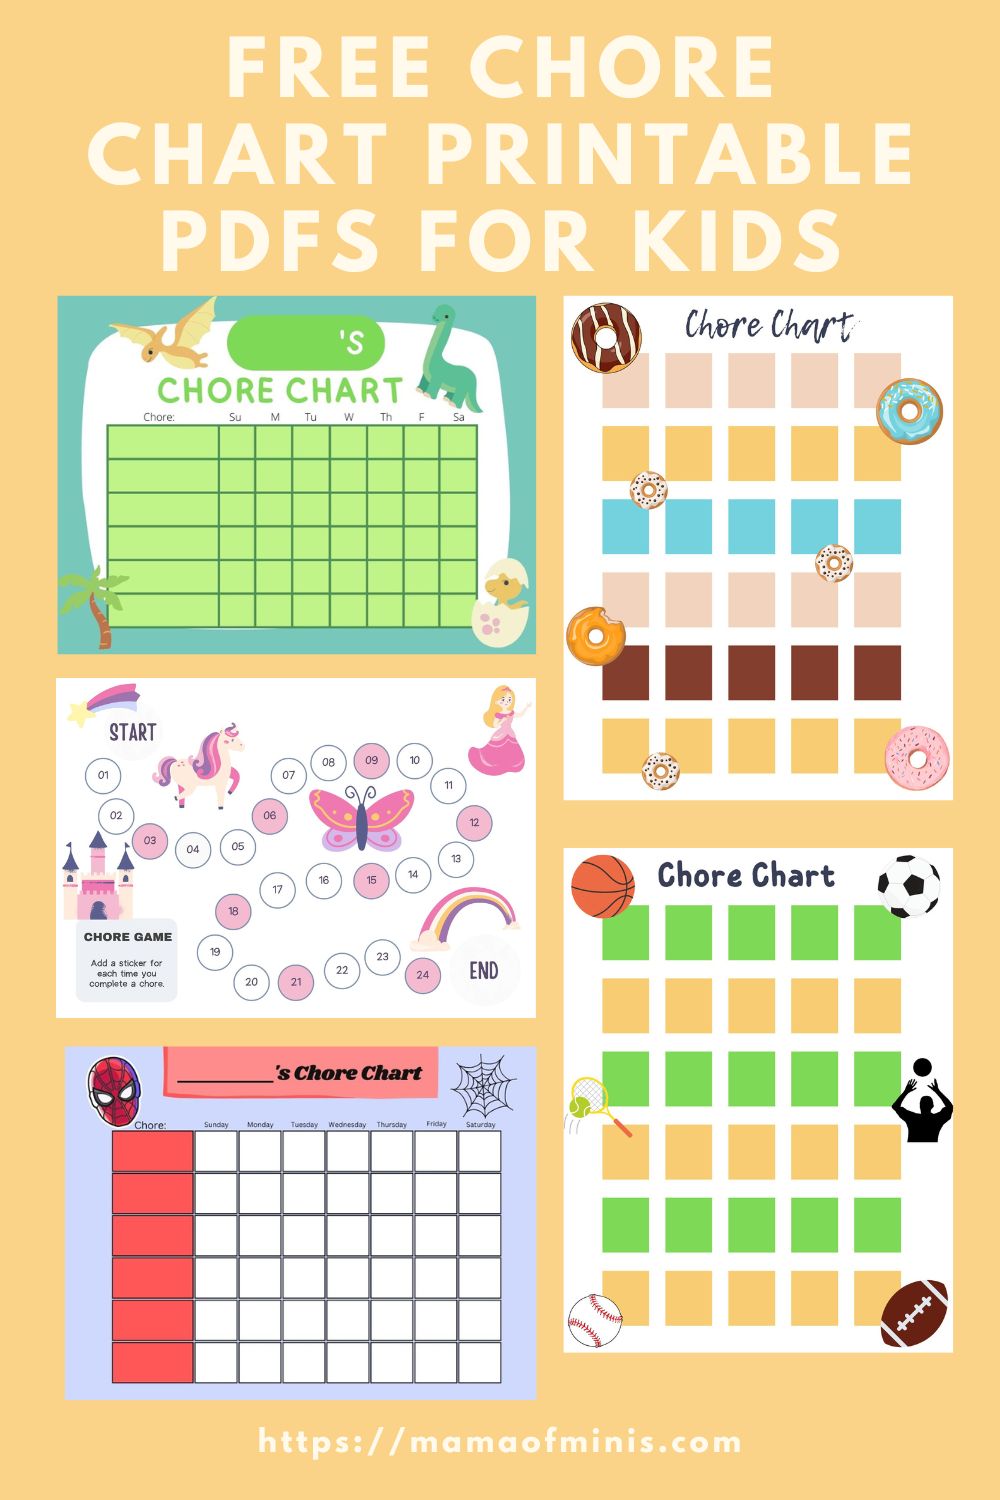 Free Chore Chart Printable PDFs for Kids